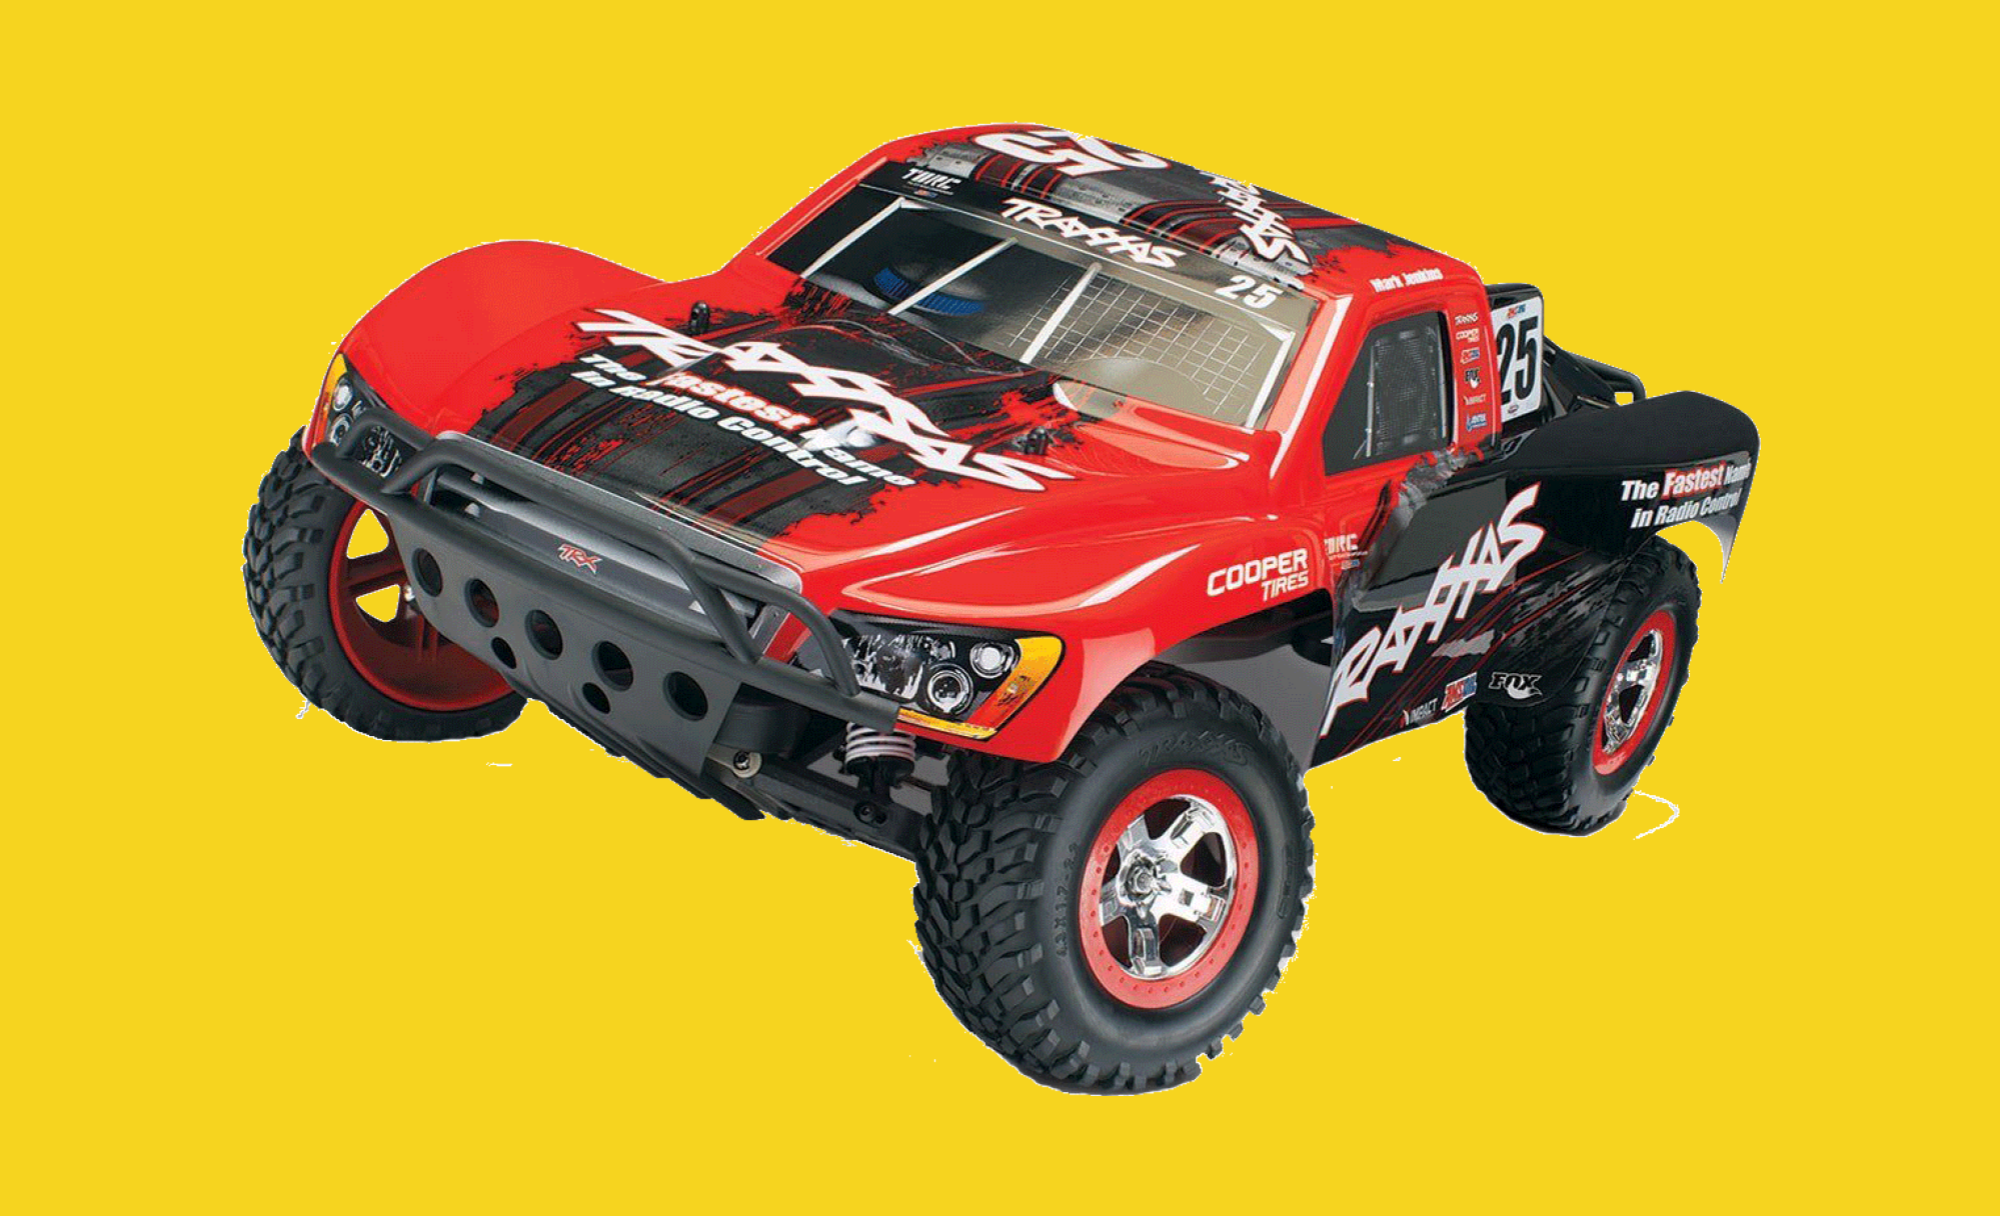 Cover image featuring Traxxas Slash 4x4